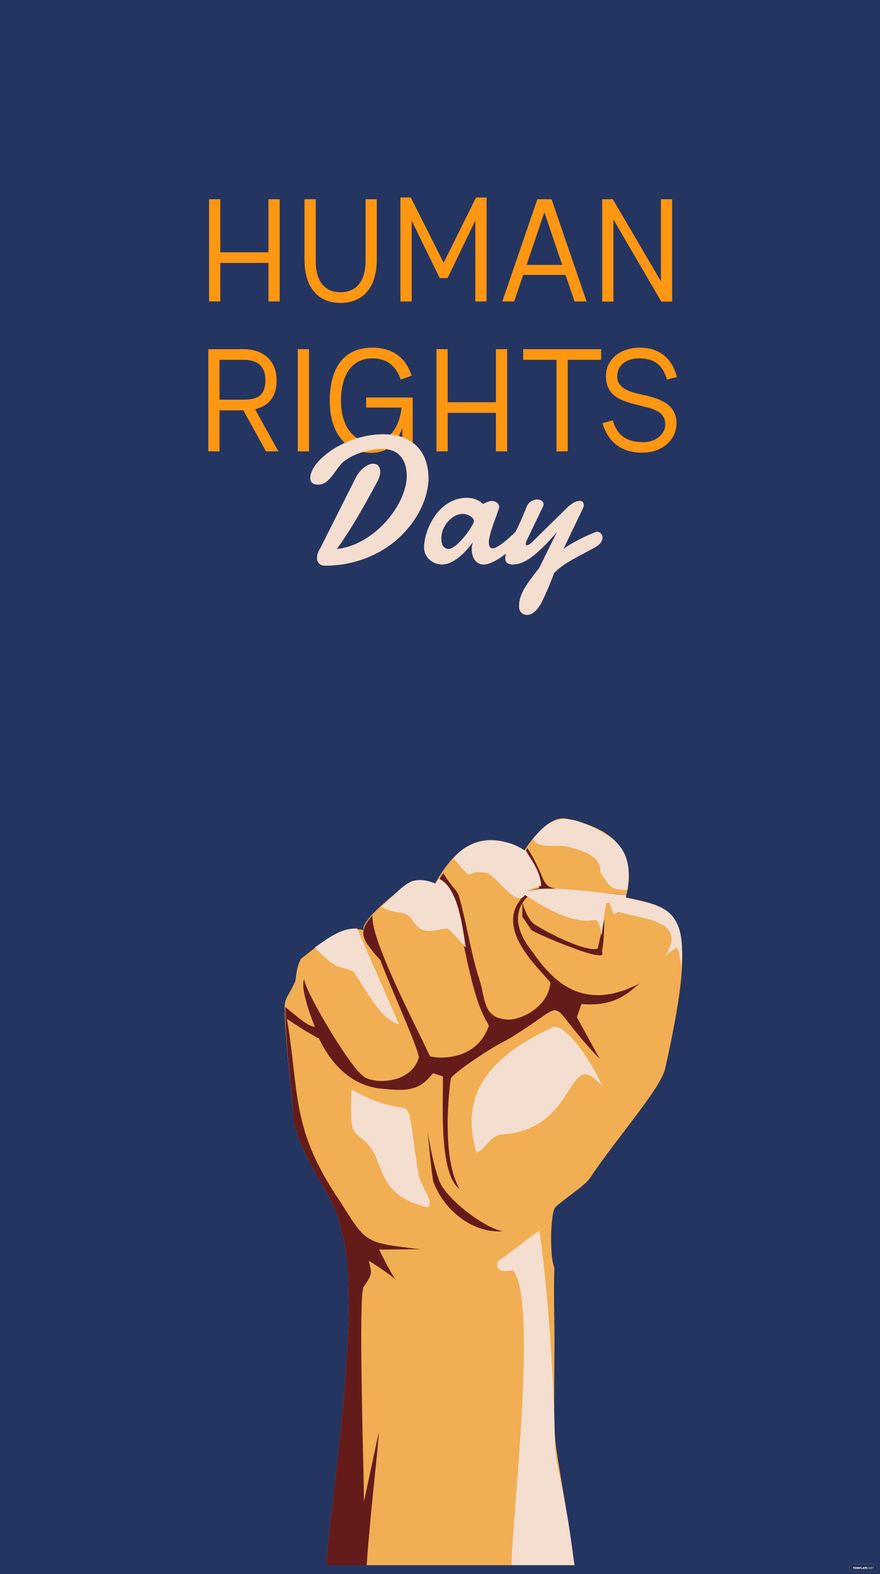 Free Human Rights Day iPhone Background in PDF, Illustrator, PSD, EPS, SVG, JPG, PNG